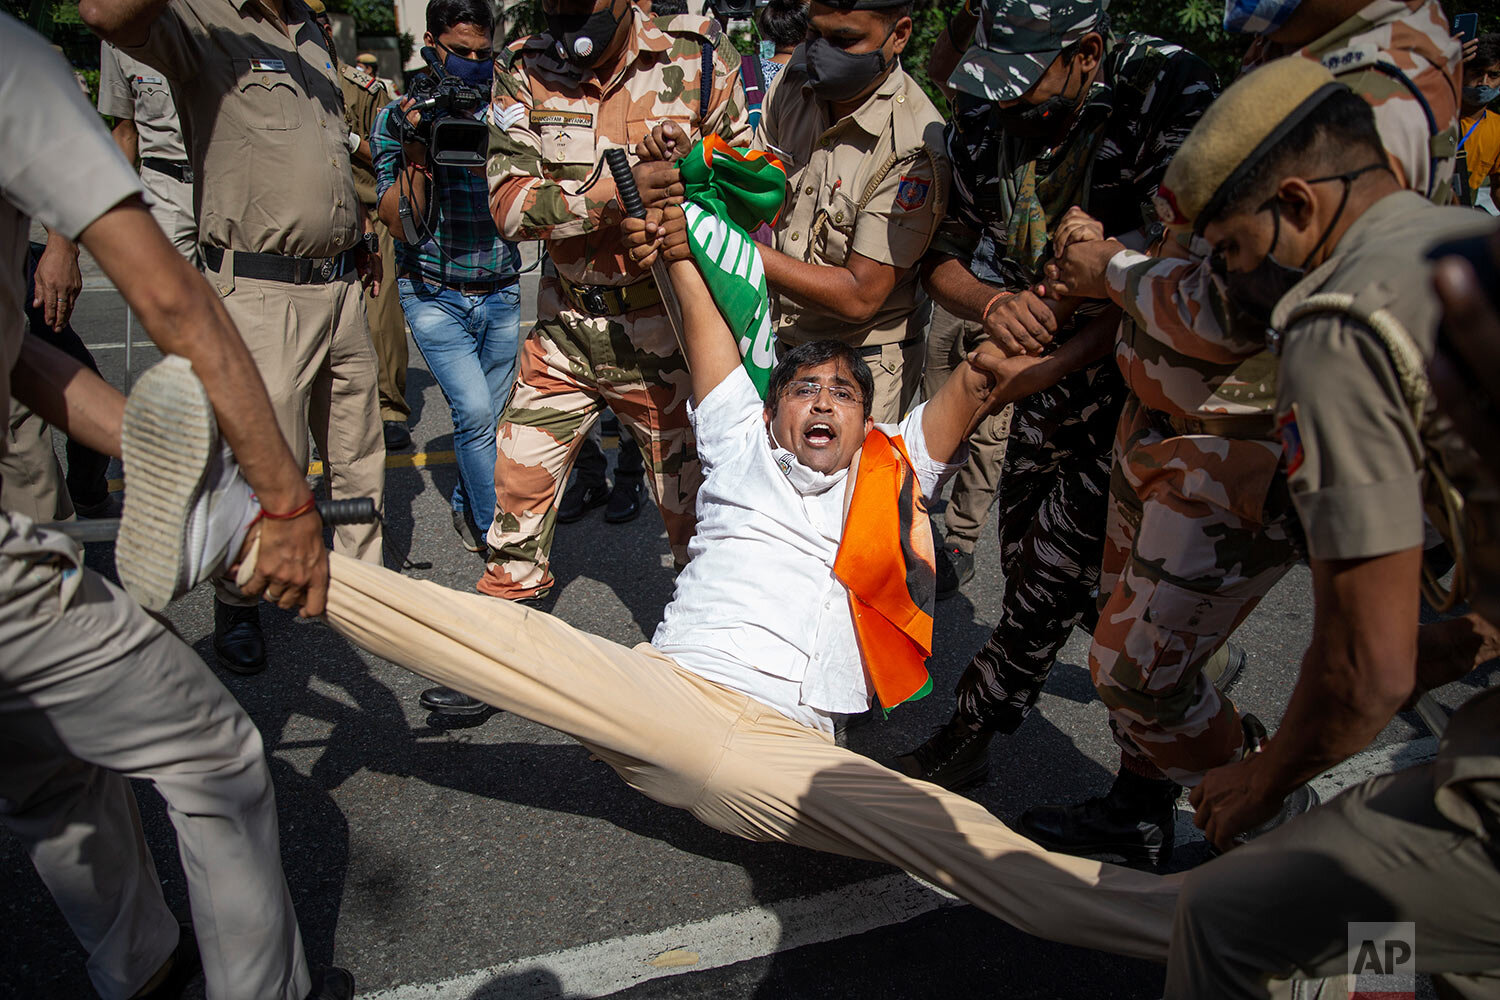  A Congress party supporter protesting against gang rape and the killing of a woman in Uttar Pradesh’s Hathras district is detained by police in New Delhi, India, Wednesday, Sept. 30, 2020.  (AP Photo/Altaf Qadri) 